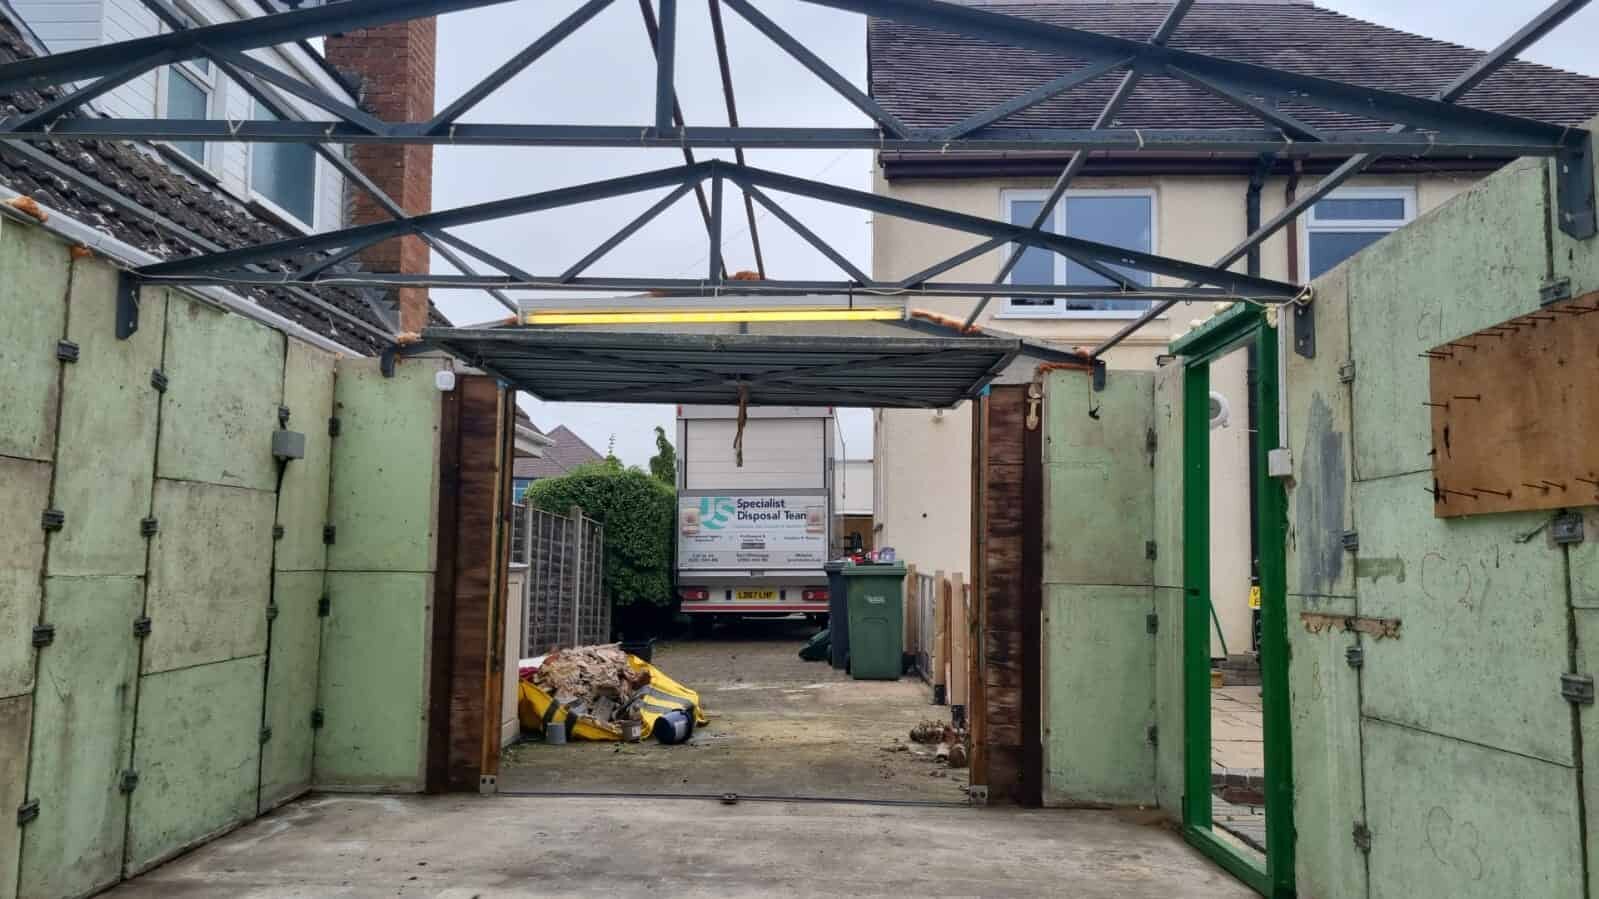 Nottingham Asbestos Removal After